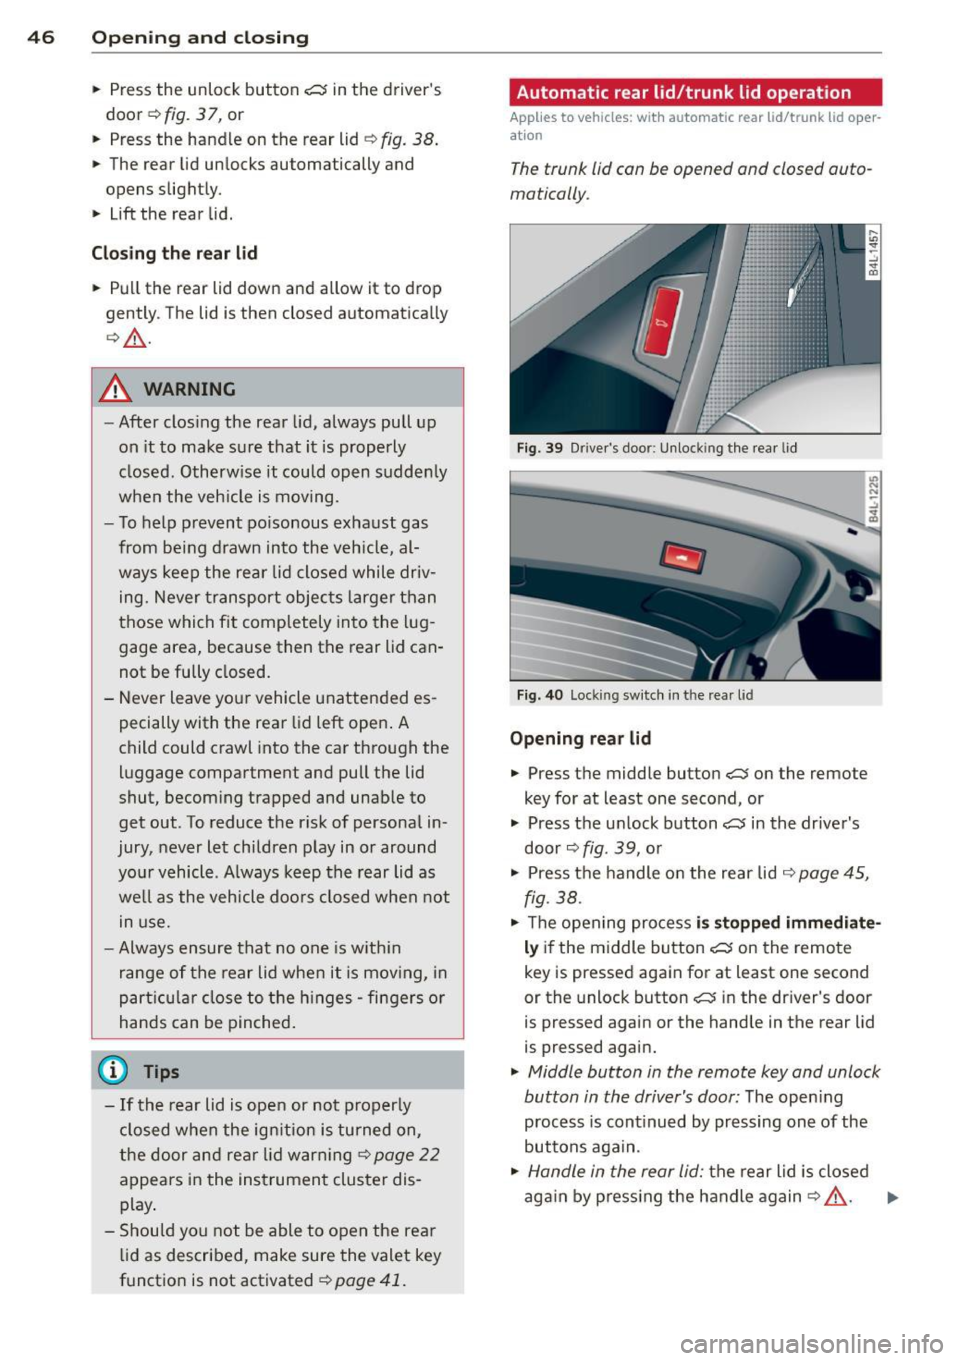 AUDI Q7 2012  Owner´s Manual 46  Opening and  clo sing 
•  Press  the  unlock  button ,c::j in the  driver s 
door ¢ 
fig. 3 7,  or 
•  Press  the  handle  on  the  rear  lid¢ 
fig. 38. 
• The  rear  lid un locks  automa